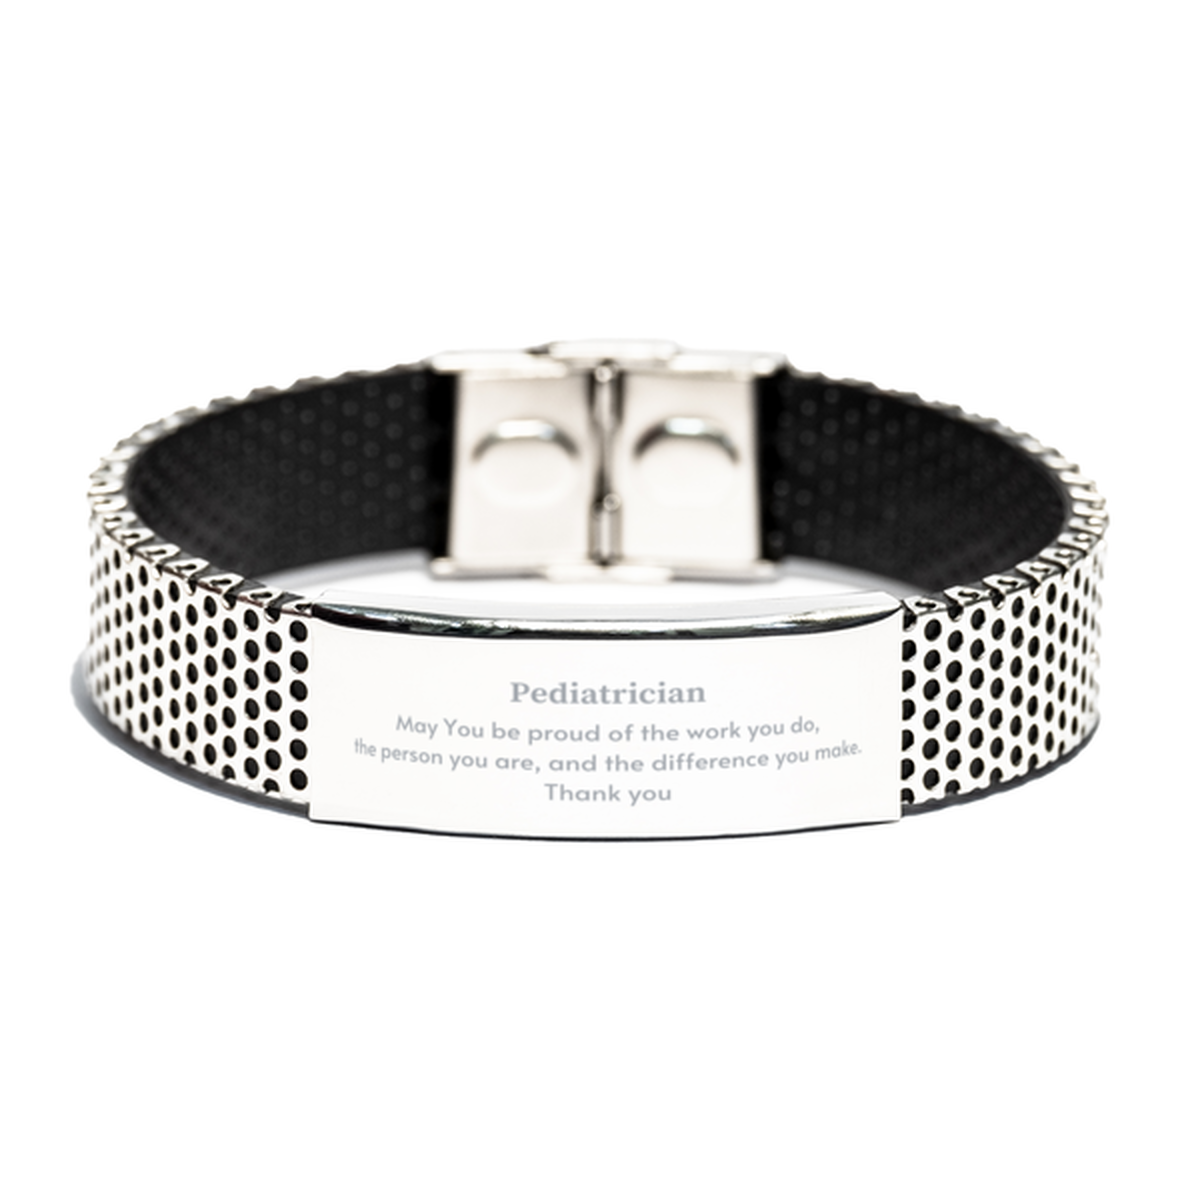 Heartwarming Stainless Steel Bracelet Retirement Coworkers Gifts for Pediatrician, Pediatrician May You be proud of the work you do, the person you are Gifts for Boss Men Women Friends